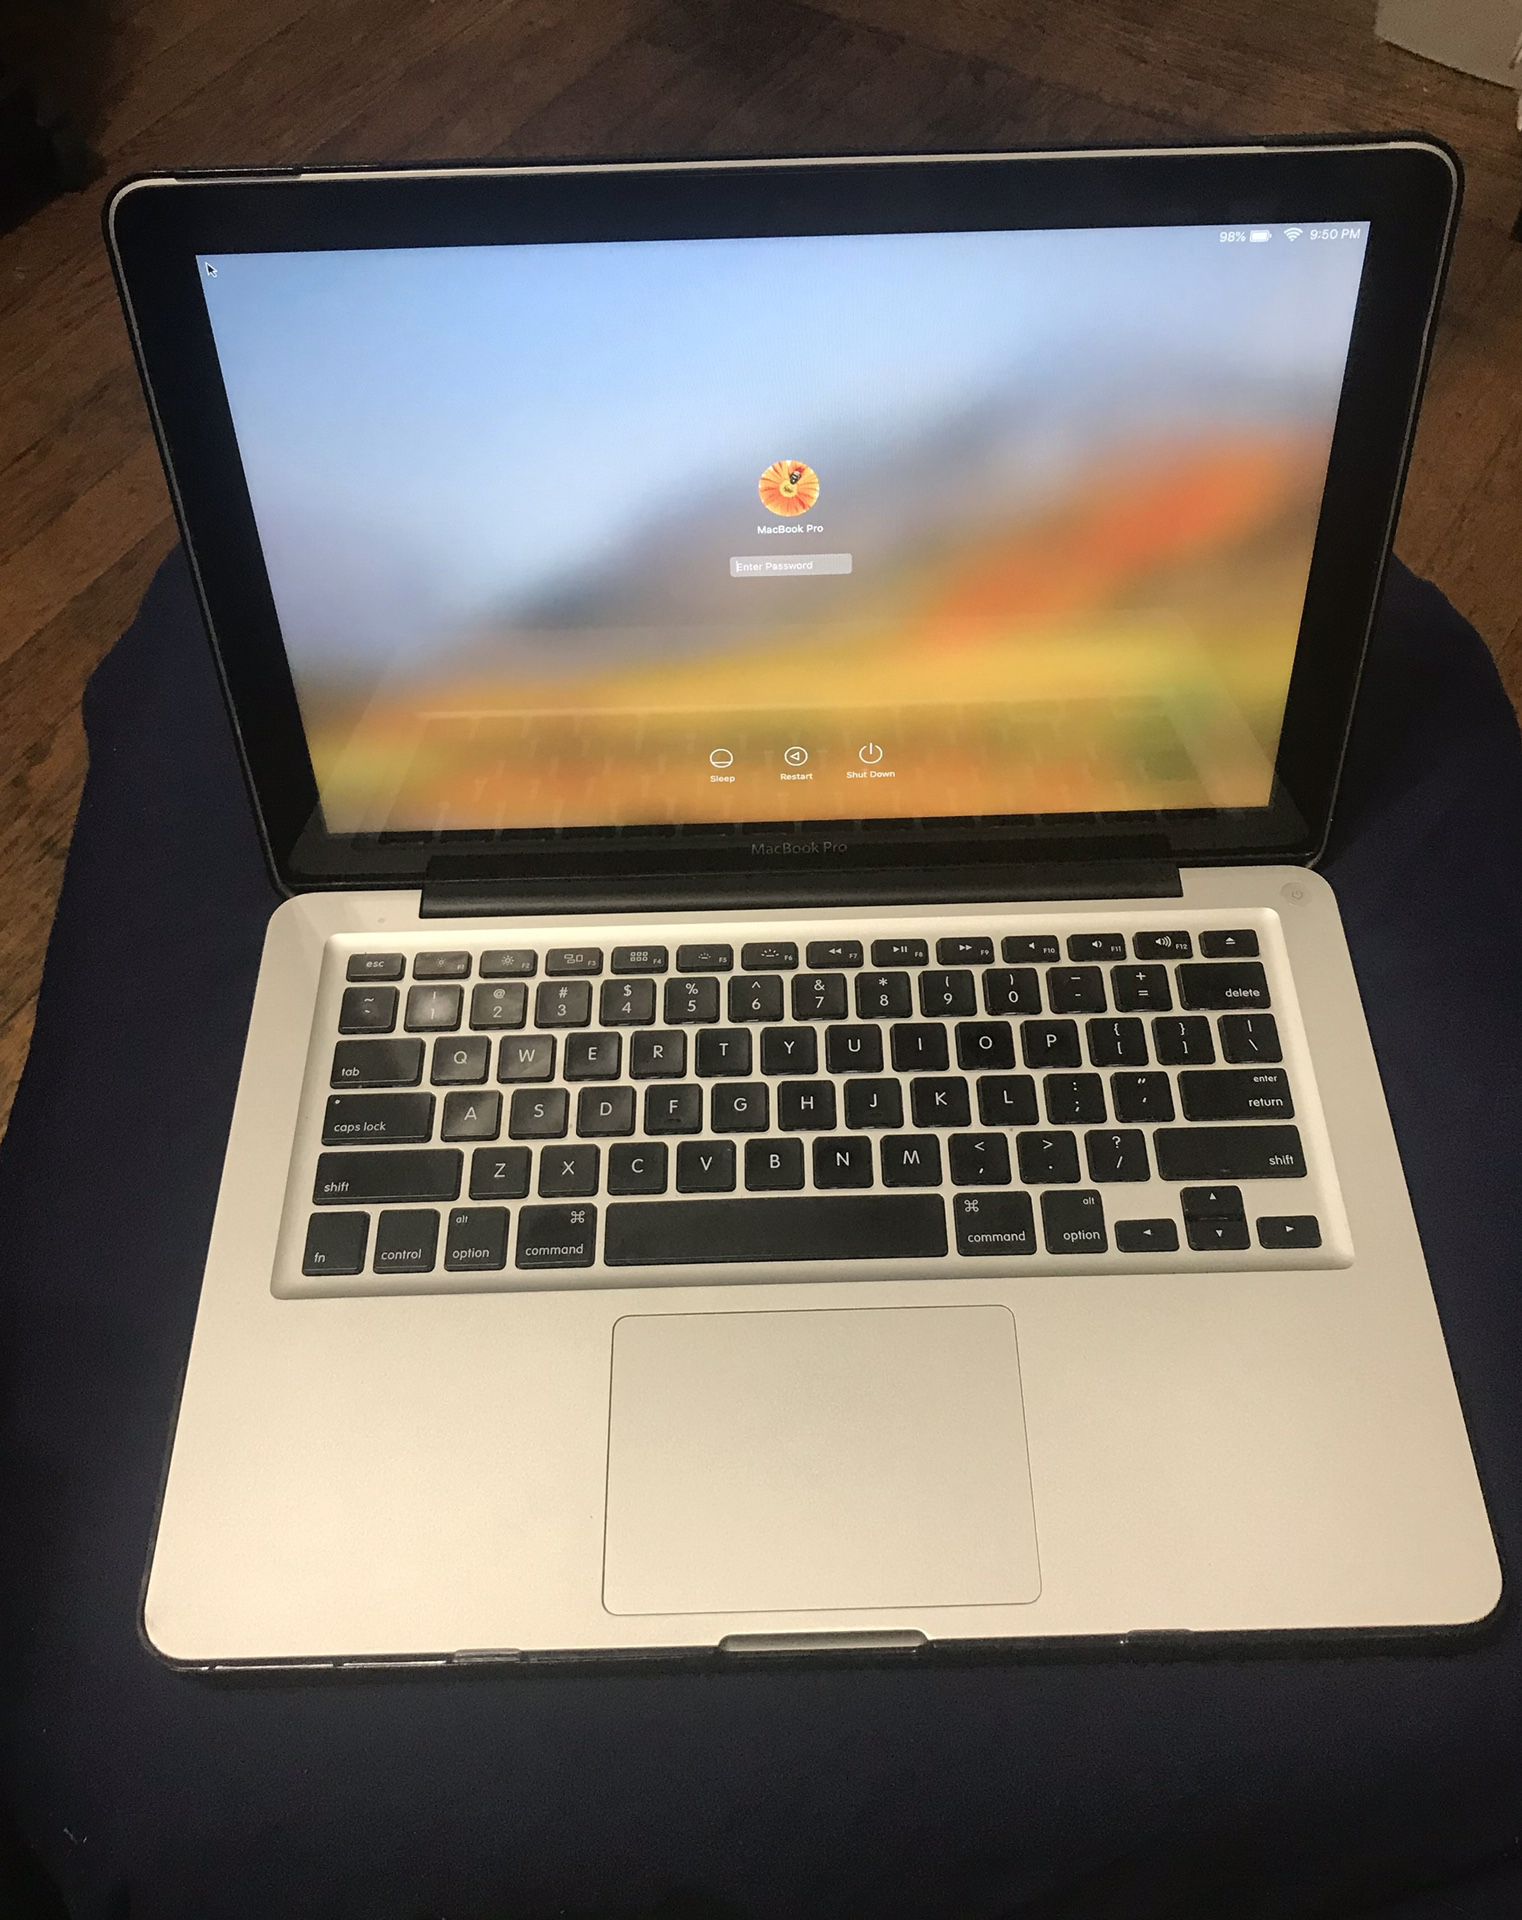 Yes it’s Available! MacBook Pro 13-Inch "Core i5" 2.4 (2011)